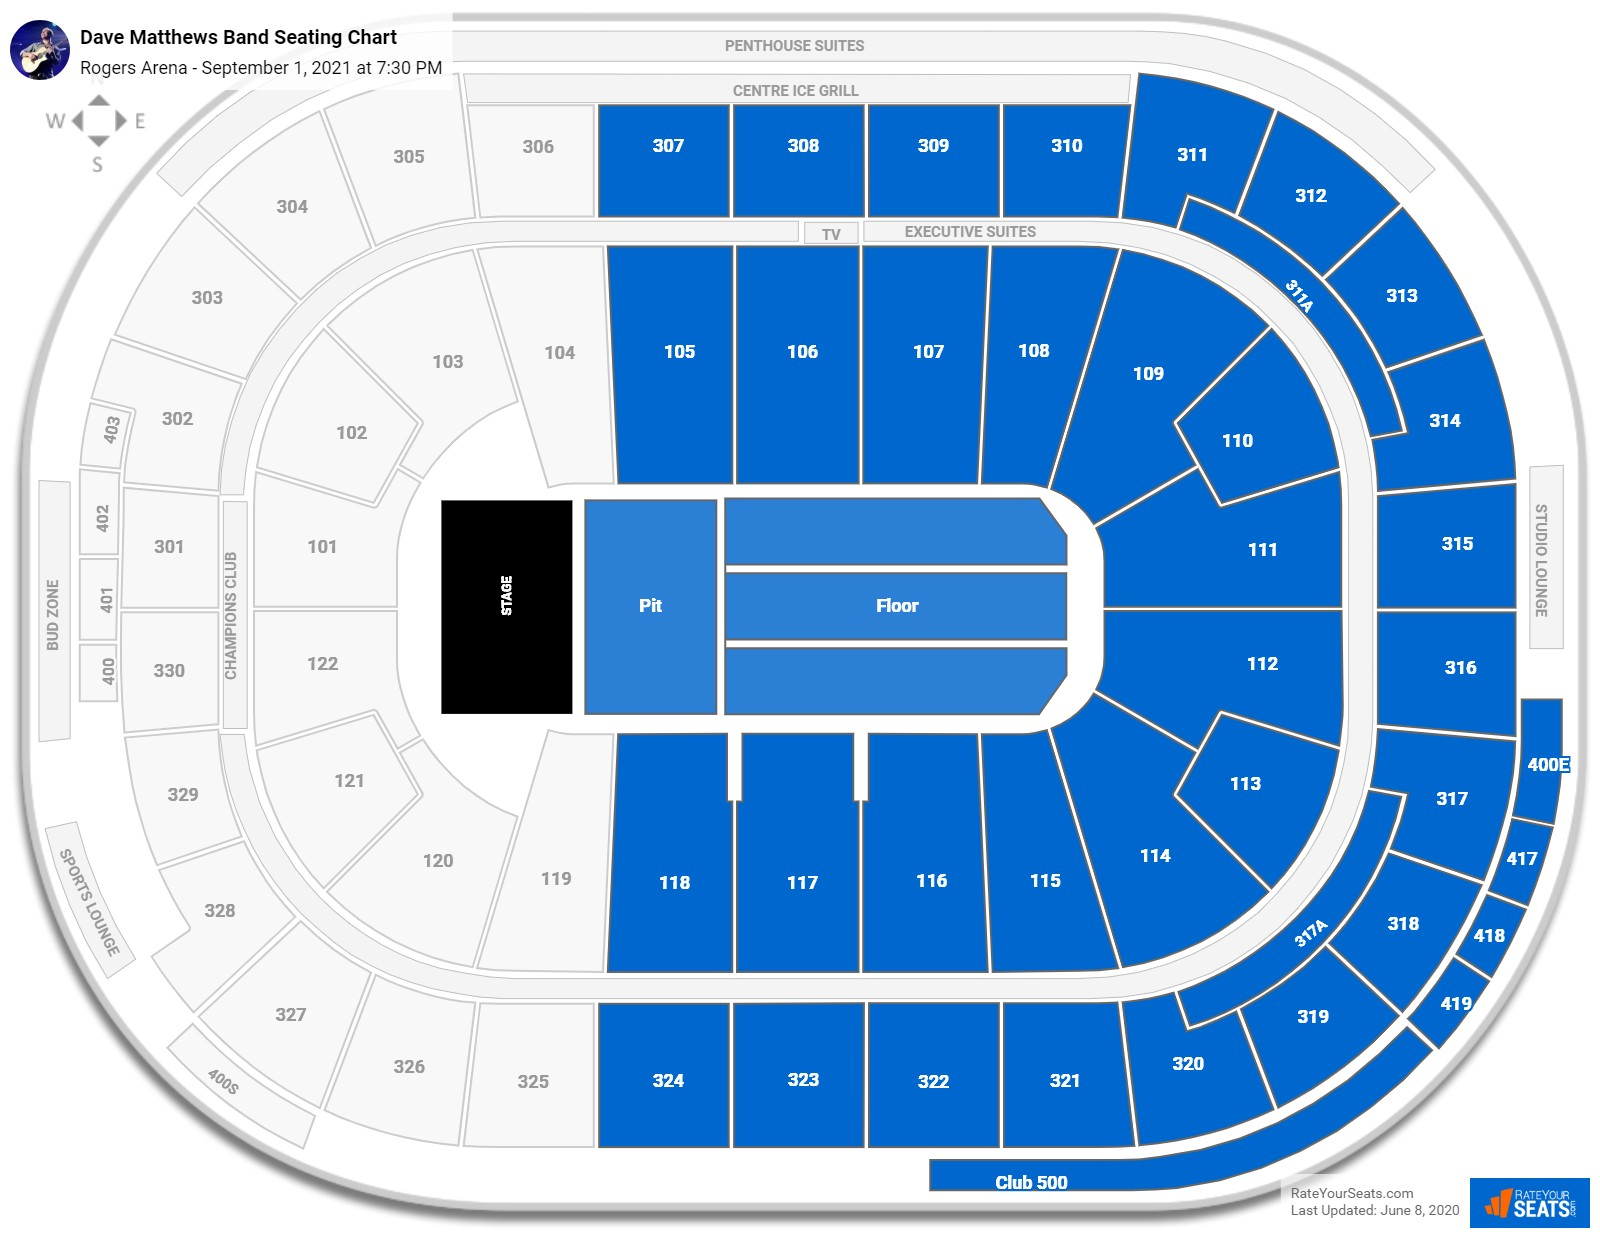 Rogers Arena Seating Charts For Concerts RateYourSeats